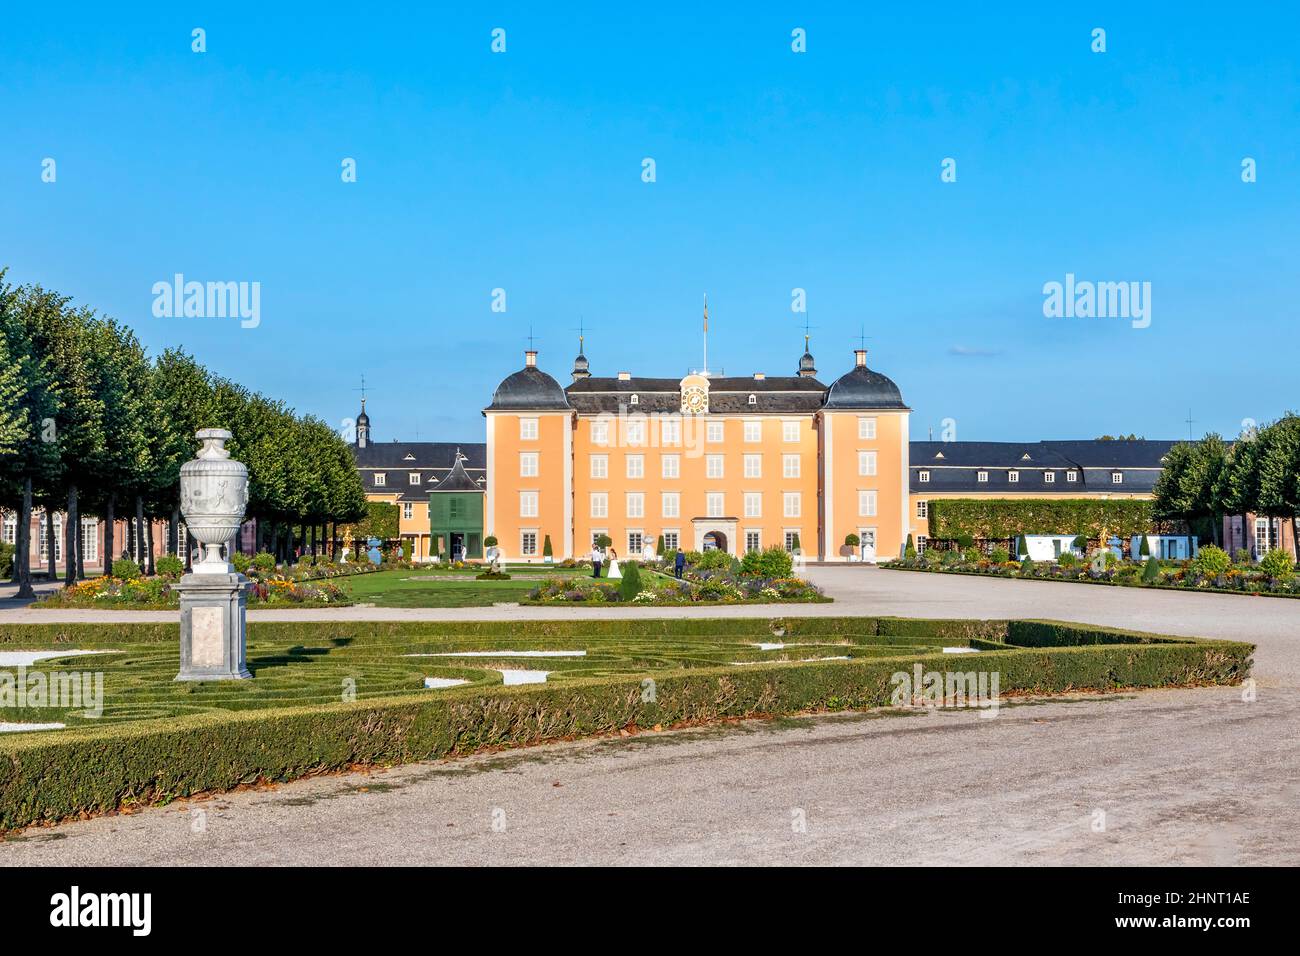 famous old and beautiful Schwetzingen Park, Royal Castle and Gardens, nearby Heidelberg city, Germany Stock Photo